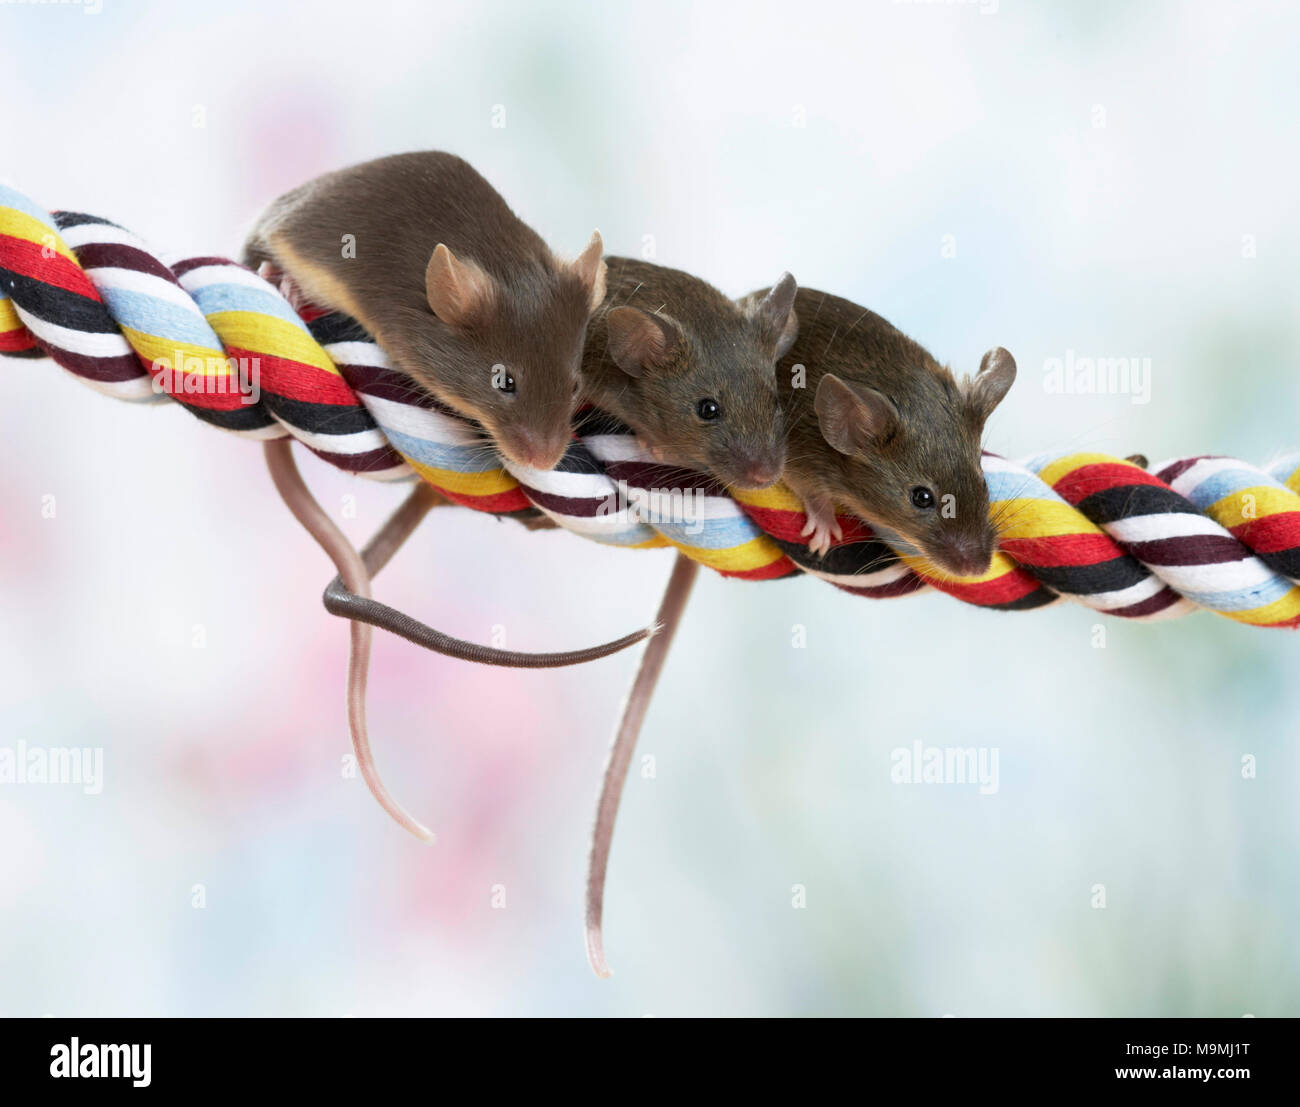 Fancy Mouse. Three mice on colourful rope. Germany Stock Photo